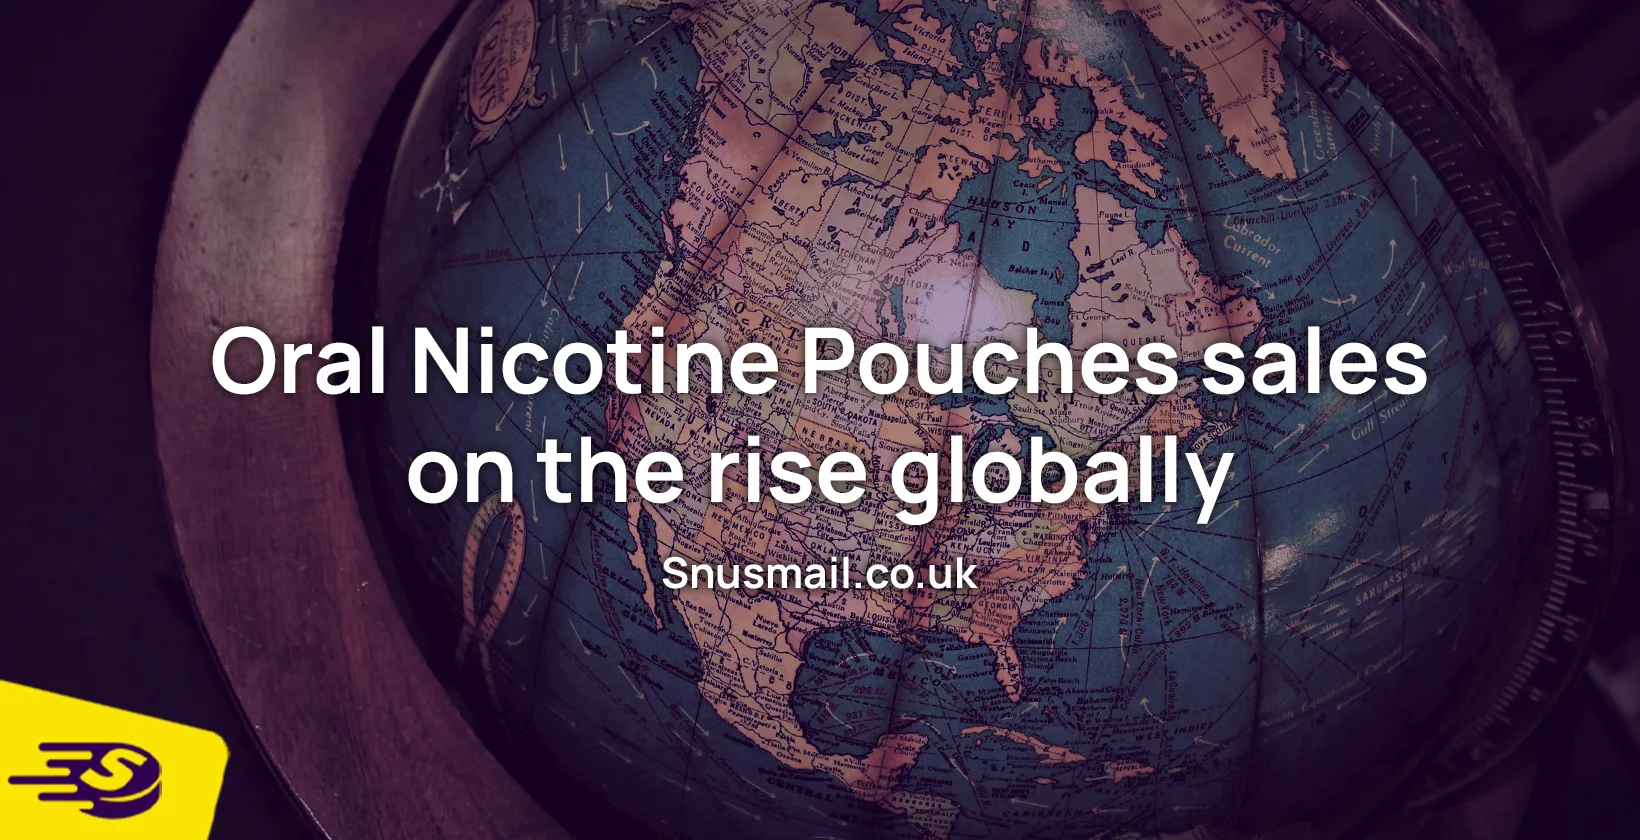 Oral nicotine pouches have raised their sale a lot globally